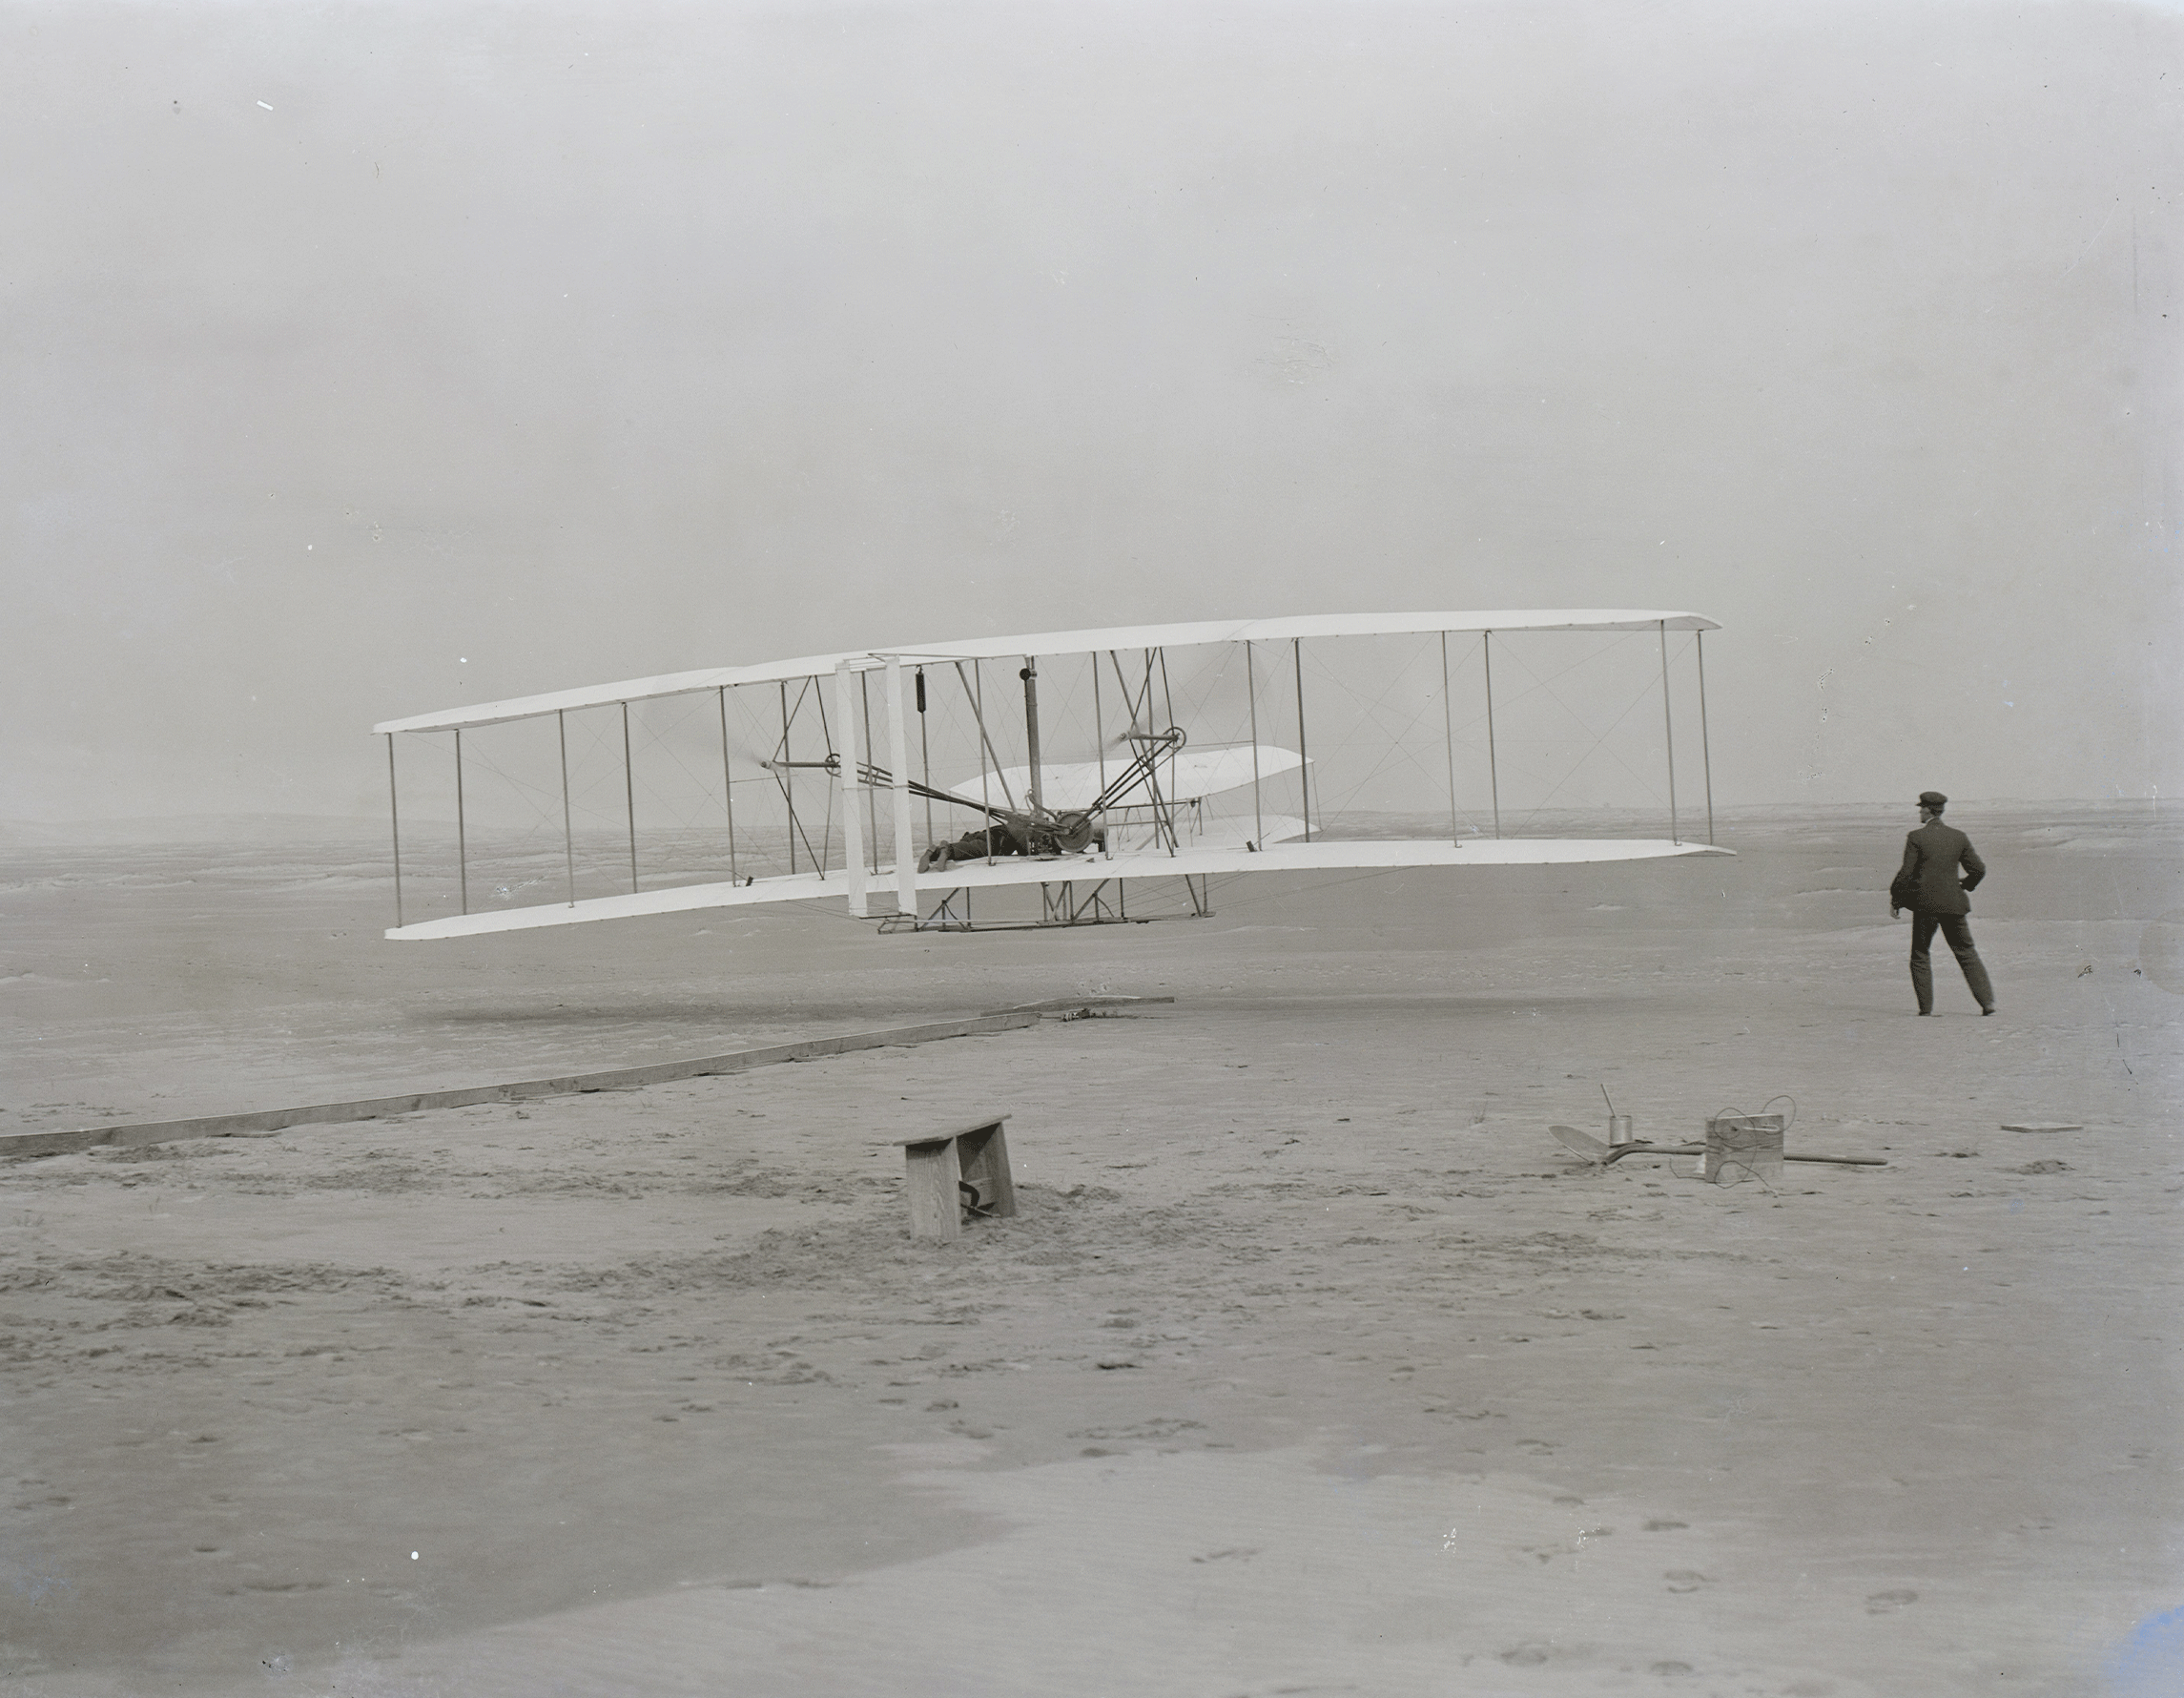 Historic photo of the Wright Flyer at Kitty Hawk